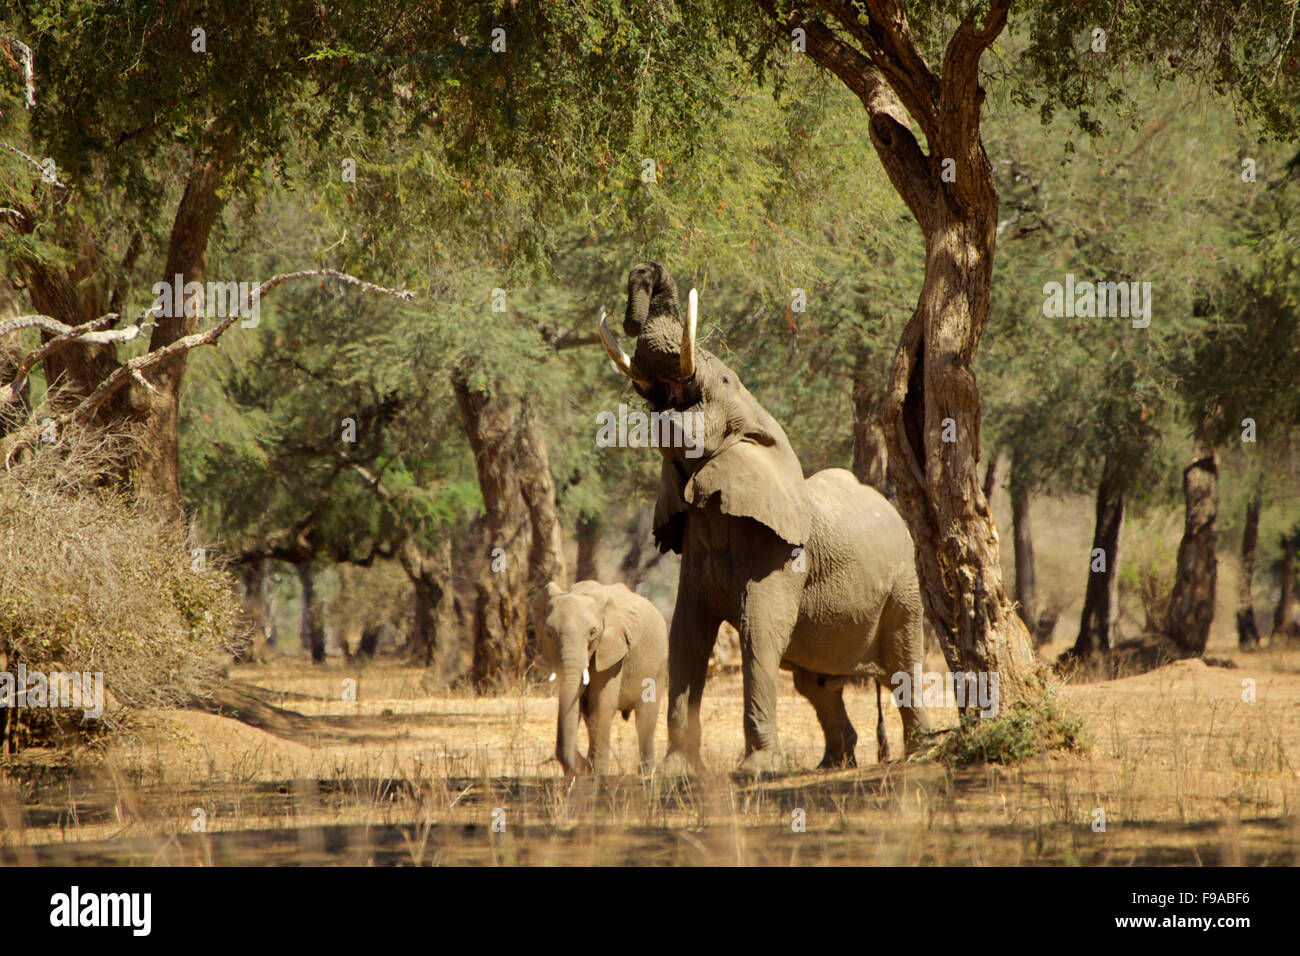 African elephant reaching up a tree to forage for food, Mana Pools, Zimbabwe Stock Photo